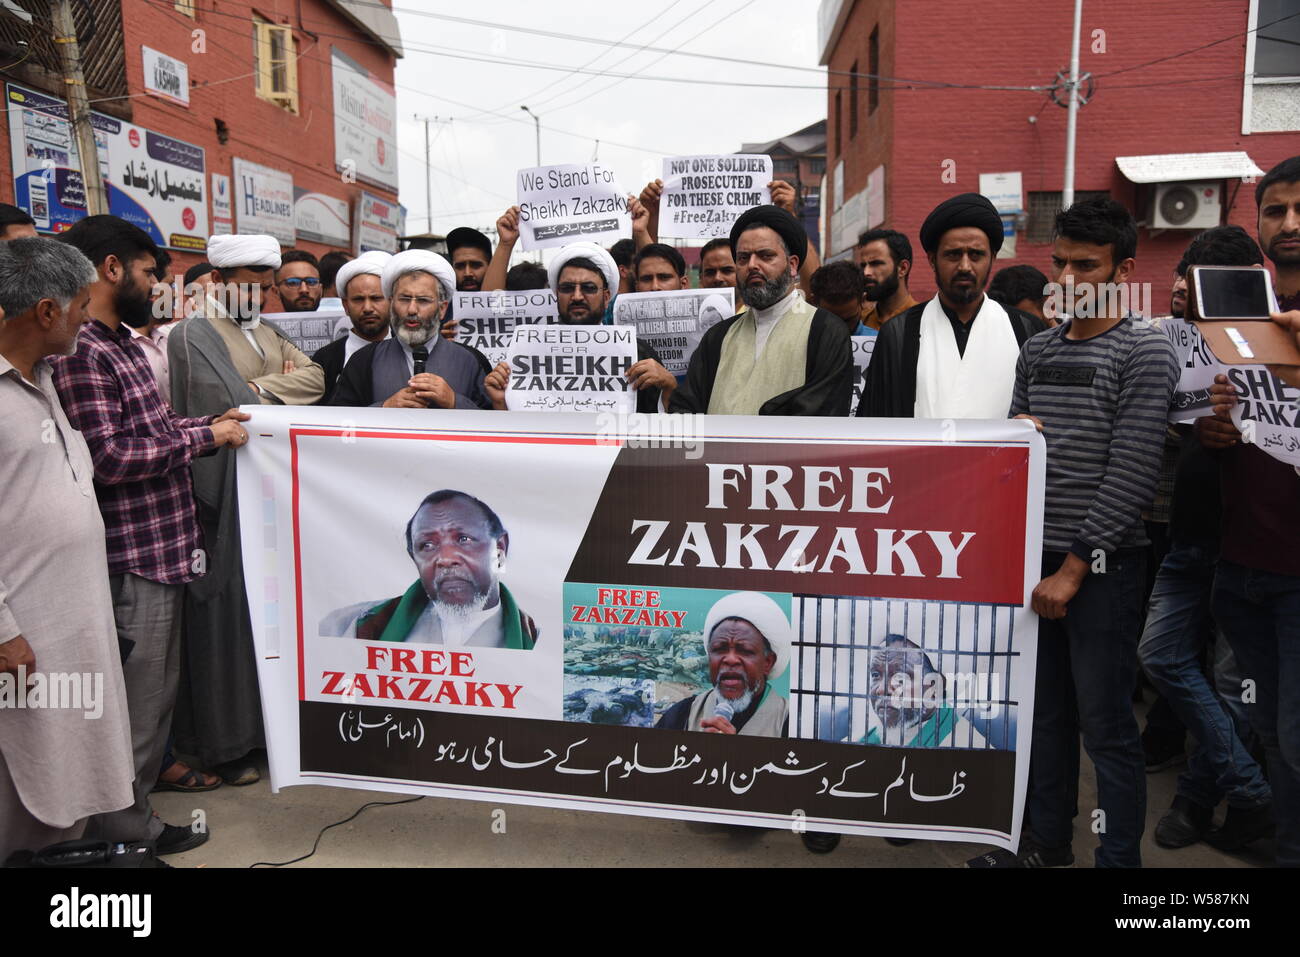 Kashmiri Shia Muslim demonstrators hold a banner during a protest in Srinagar.Members of the Shia Community of Kashmir extended their support to Sheikh Ibrahim Yaqoub El Zakzaky, the head of Nigeria's Islamic Movement, demanding his immediate release. Sheikh Zakzaky converted from Sunni Islam to Shiasim and now is in police custody facing accusations of leading a violent group that has clashed with Nigerian law enforcement agencies, including the army, on multiple occasions in the last few years. Stock Photo